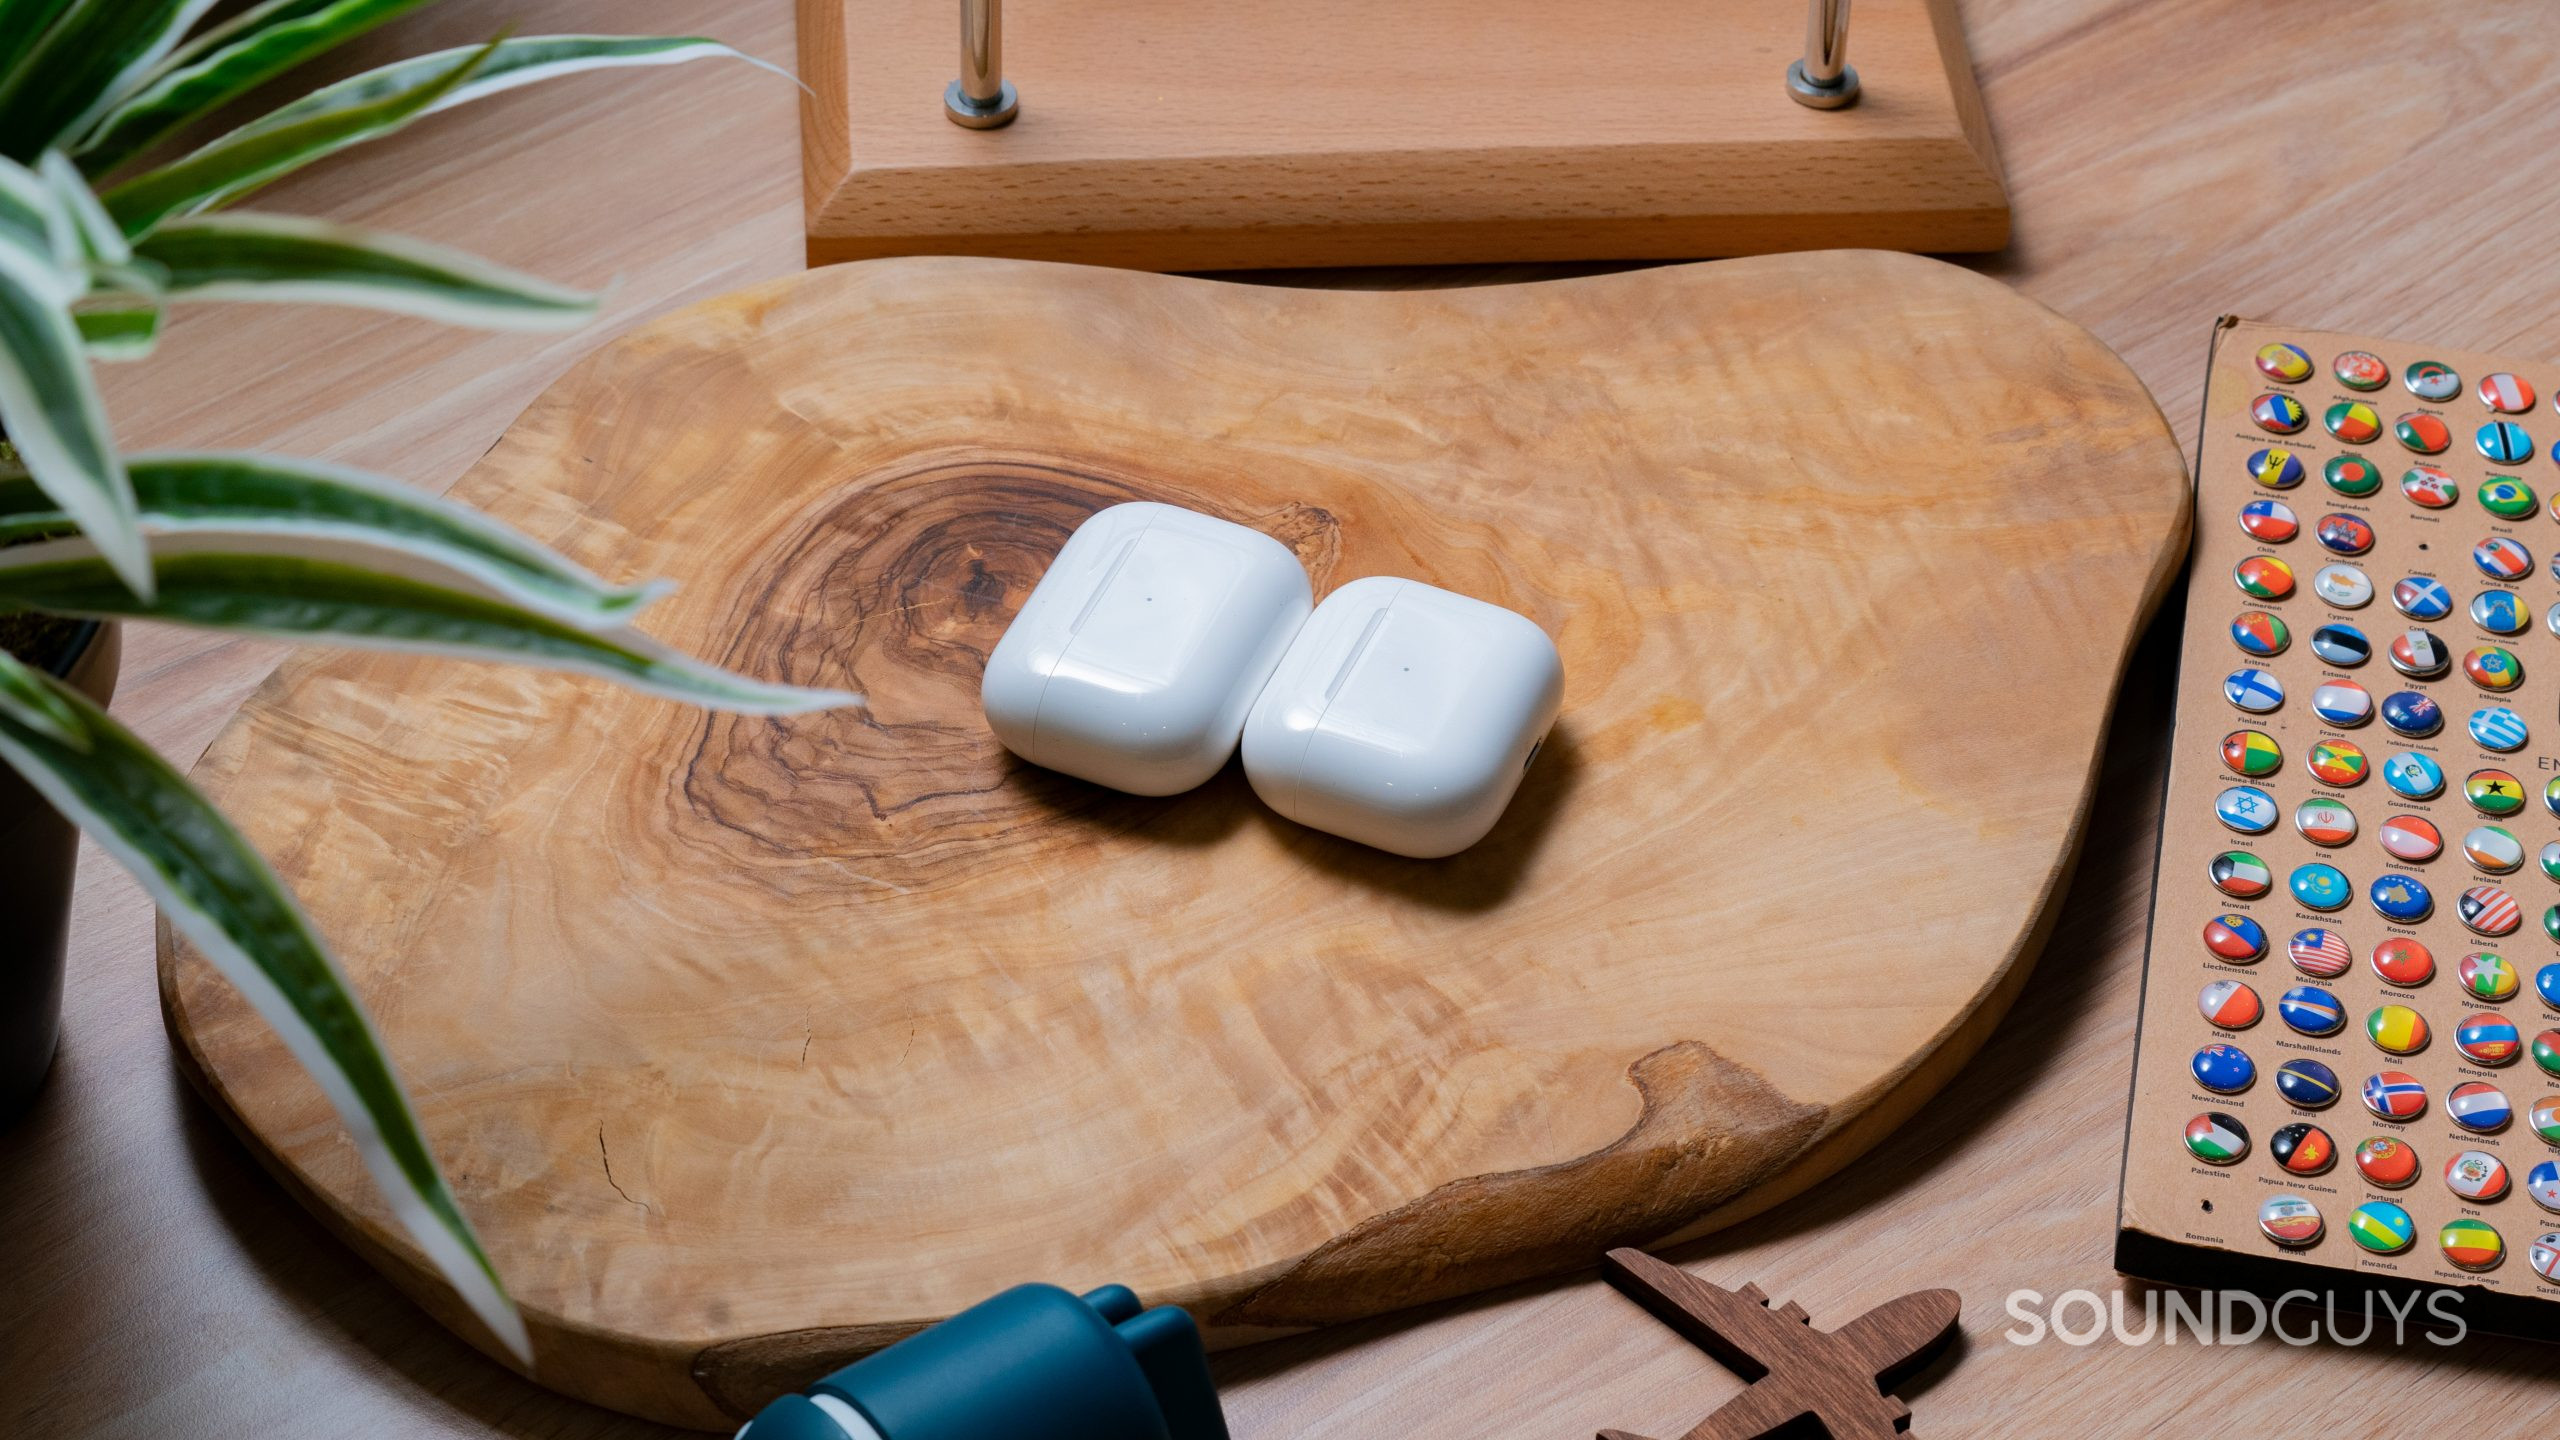 The cases of the Apple AirPods Pro Gen 2 and the Apple AirPods Gen 3 sitting side by side on a wooden table.